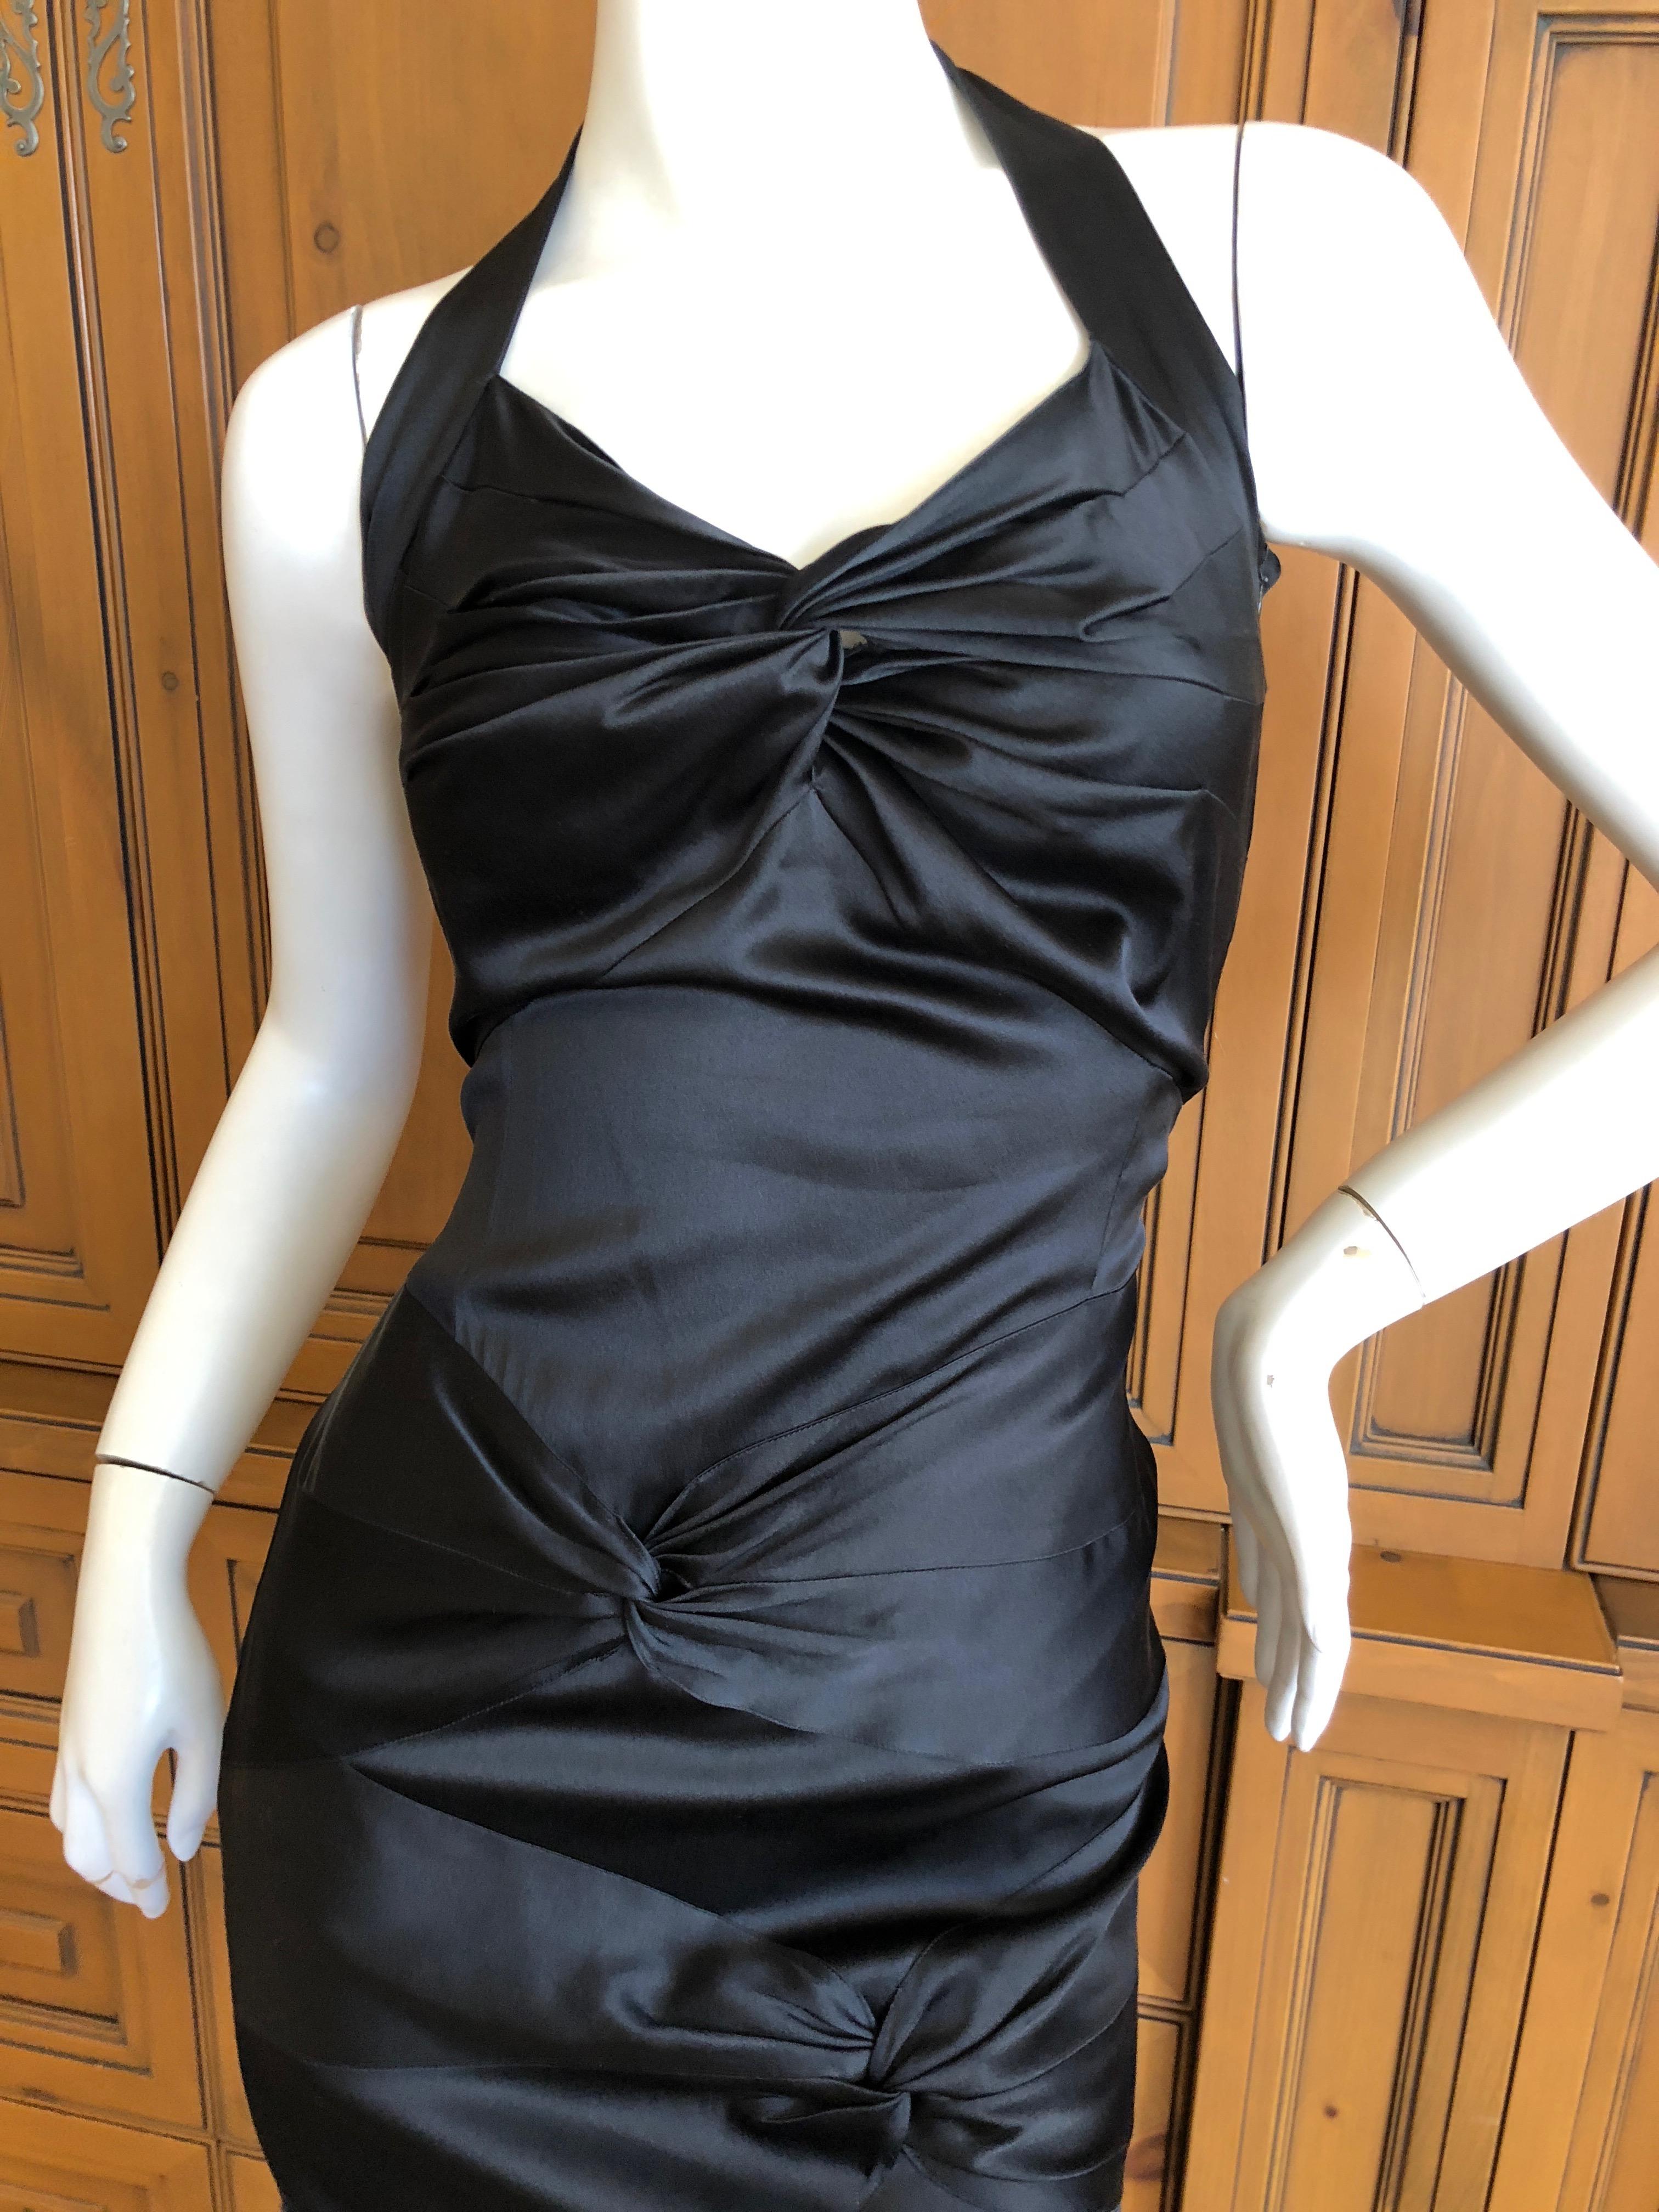 Women's Christian Dior by John Galliano Black Satin Silk Lined Knot Dress For Sale